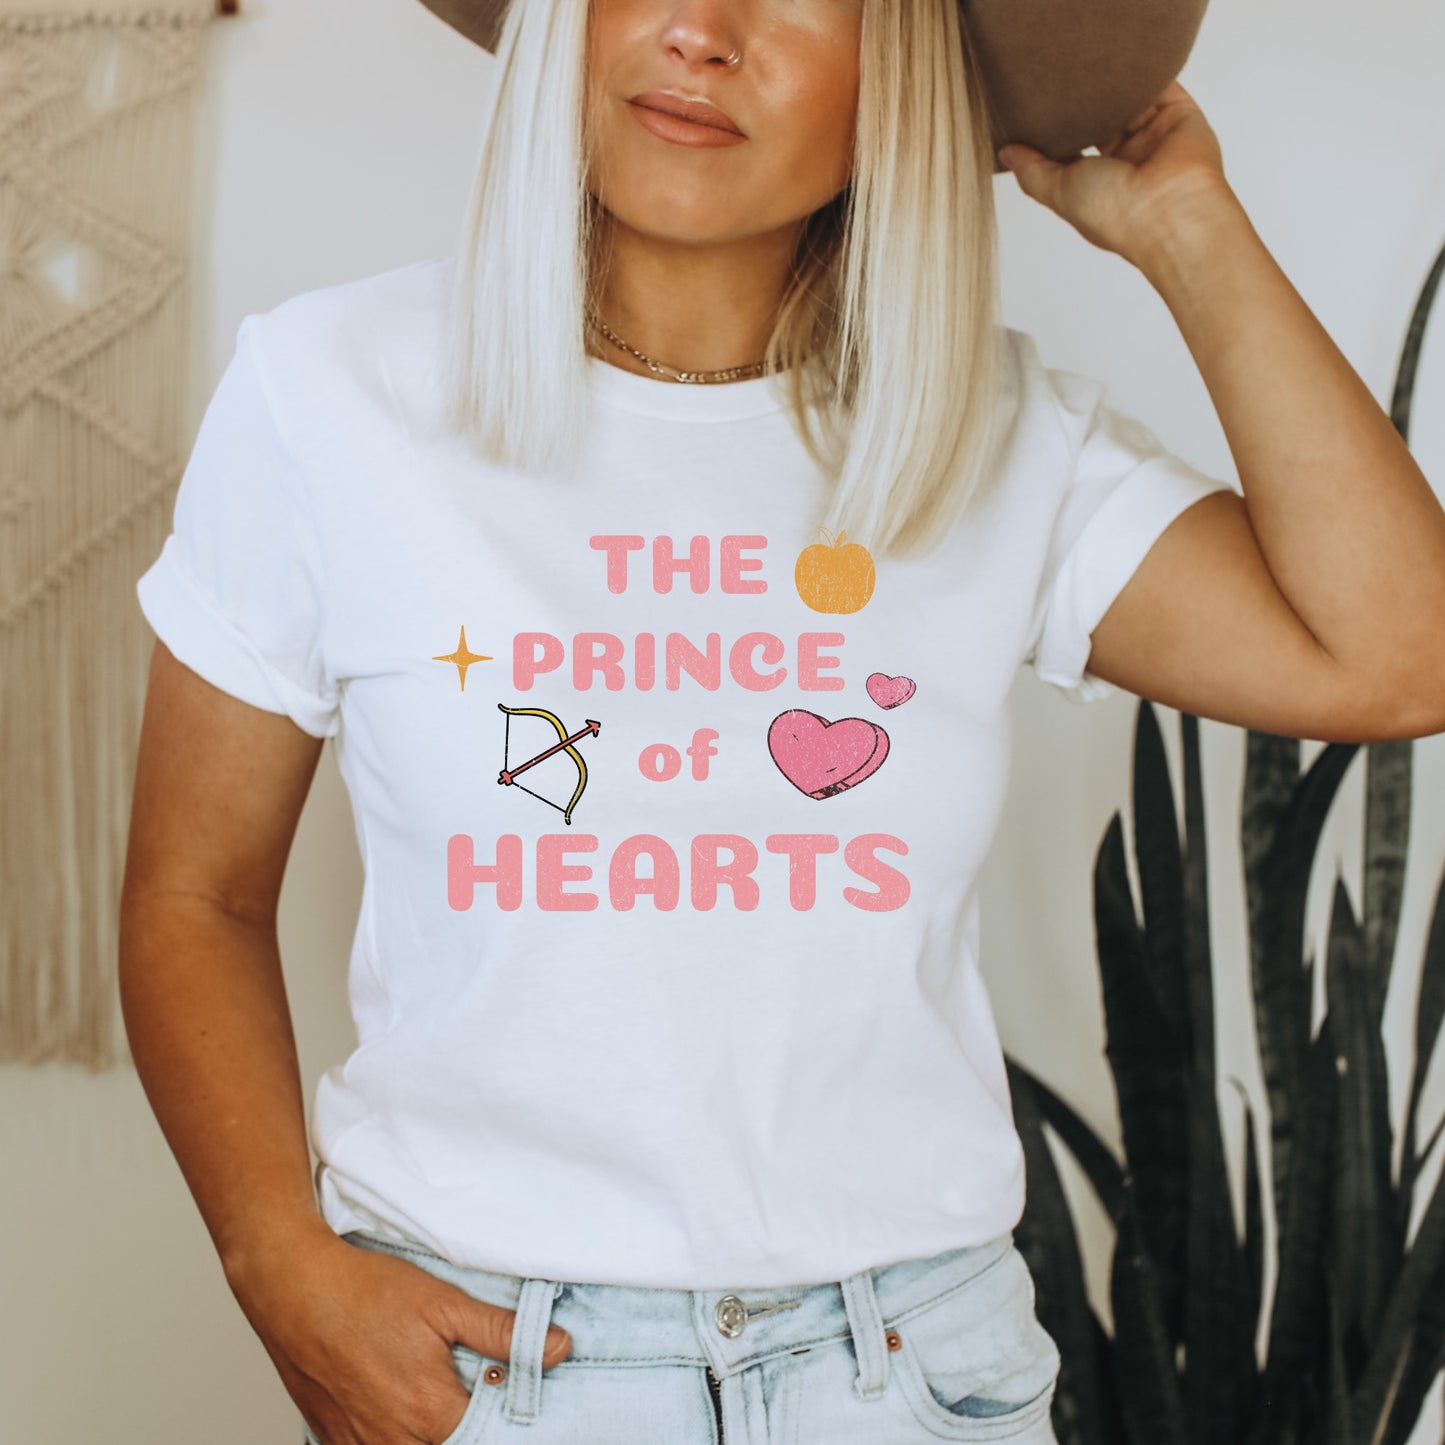 Jacks The Prince of Hearts on a White T- Shirt | Once upon a Broken Heart merch | Ink and Stories bookish merch